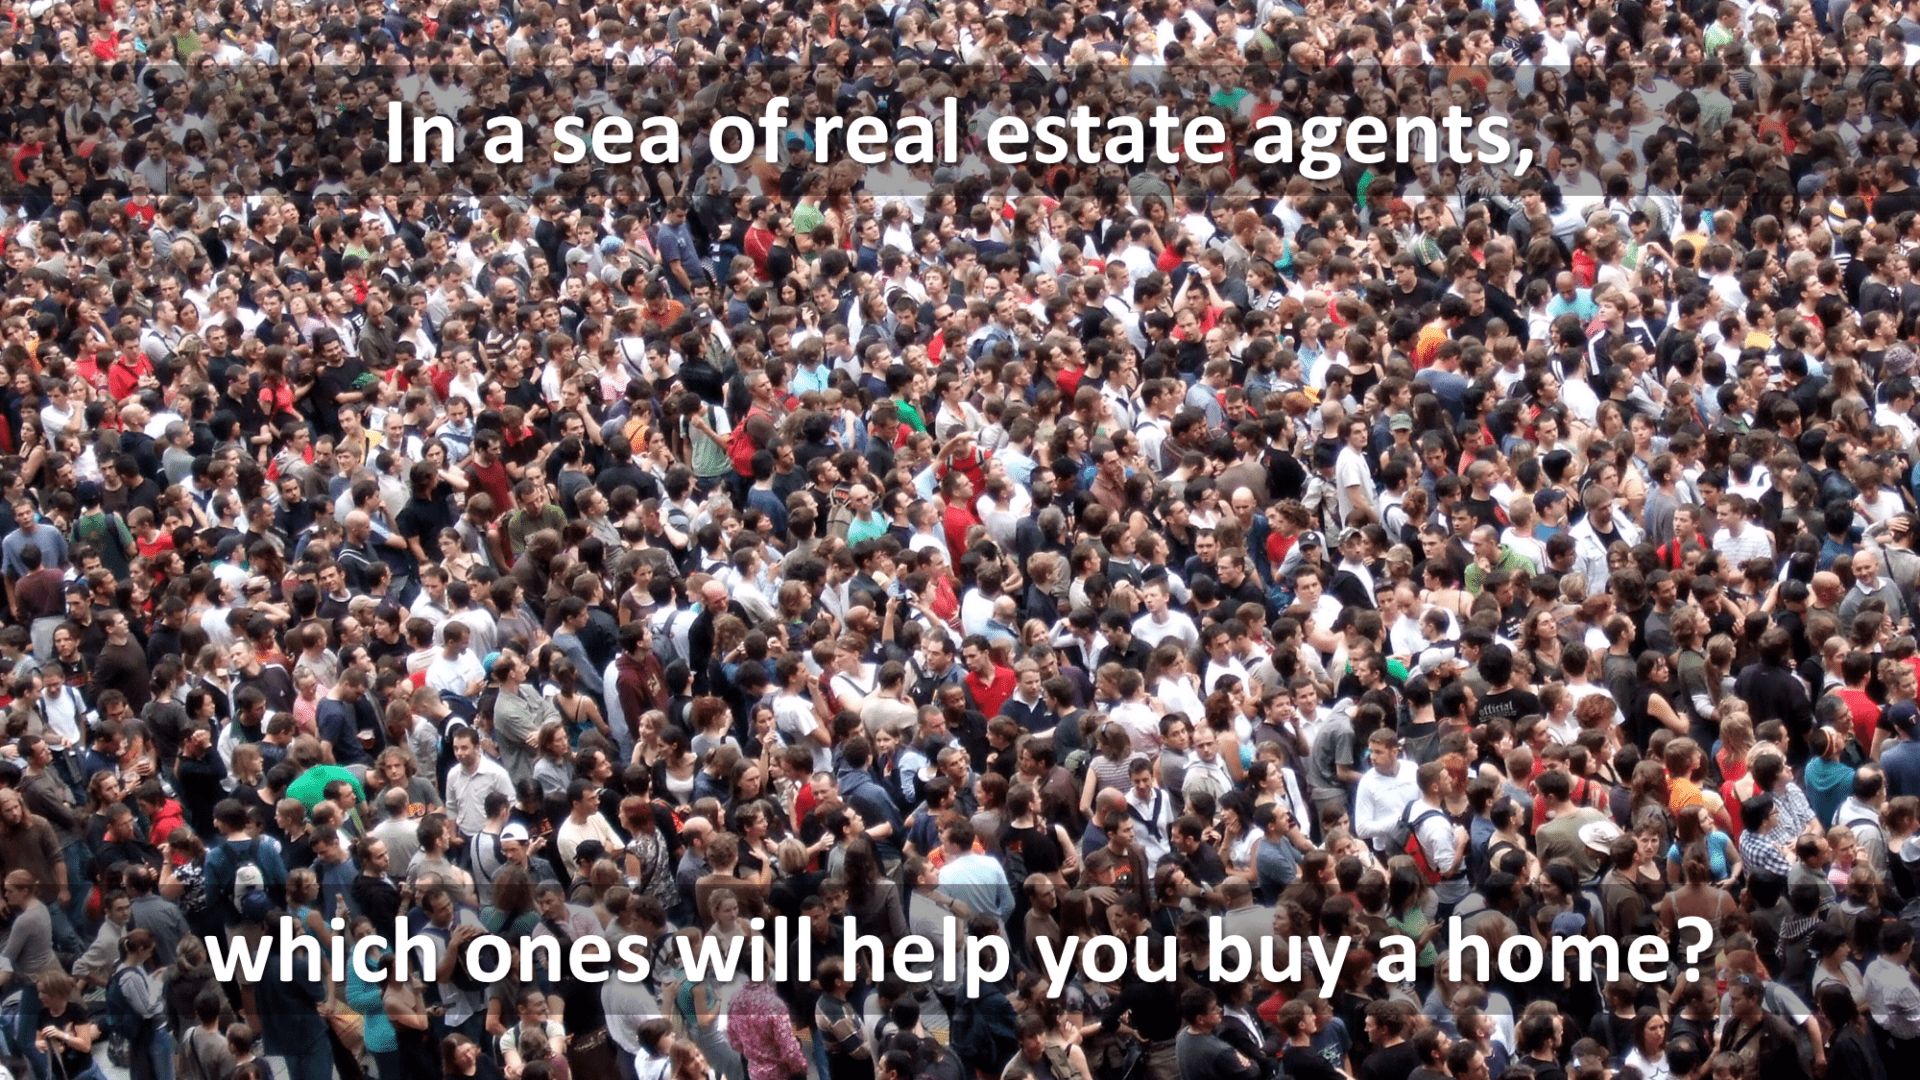 In a sea of real estate agents, which ones will help you buy your dream home?